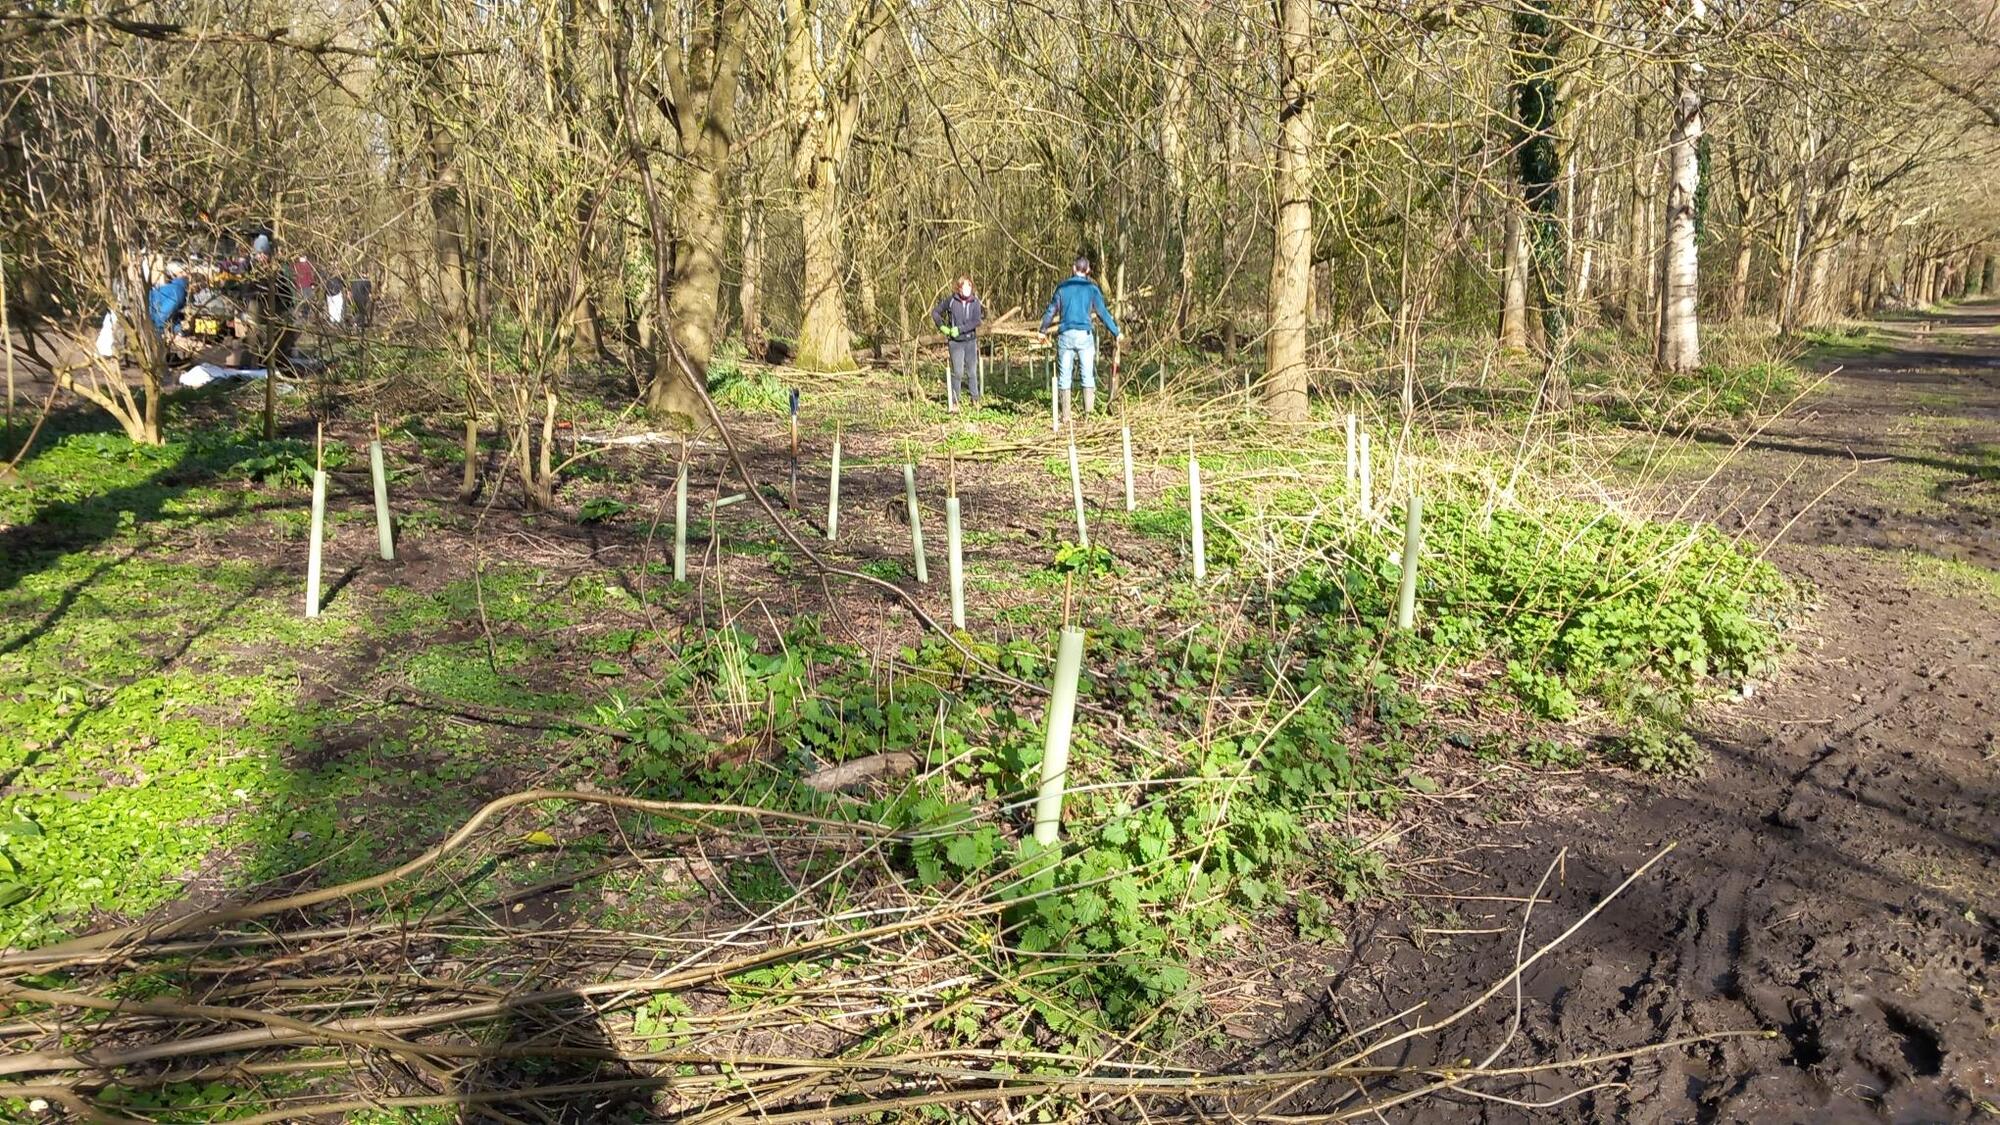 Somerset Council staffplanting native trees at Yeovil Country park